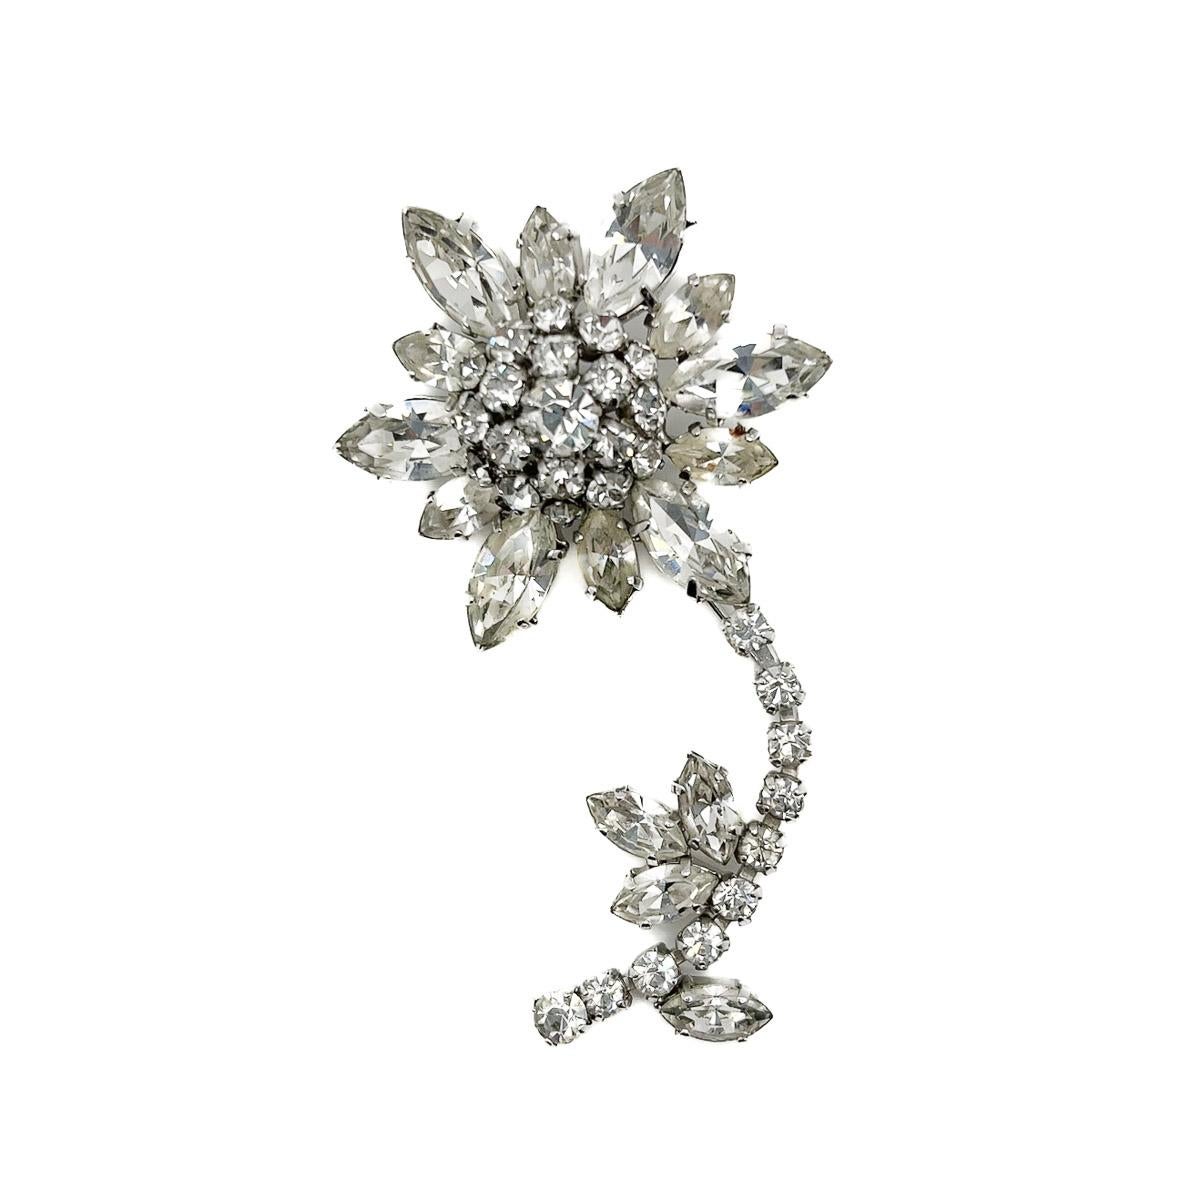 A gorgeous and utterly timeless Vintage Floral Crystal Brooch. Reminds us distinctly of the one featured in the storyline of Wham's Last Christmas video, and we are coveting the beautiful array of fancy cut navette crystal petals. With it's timeless